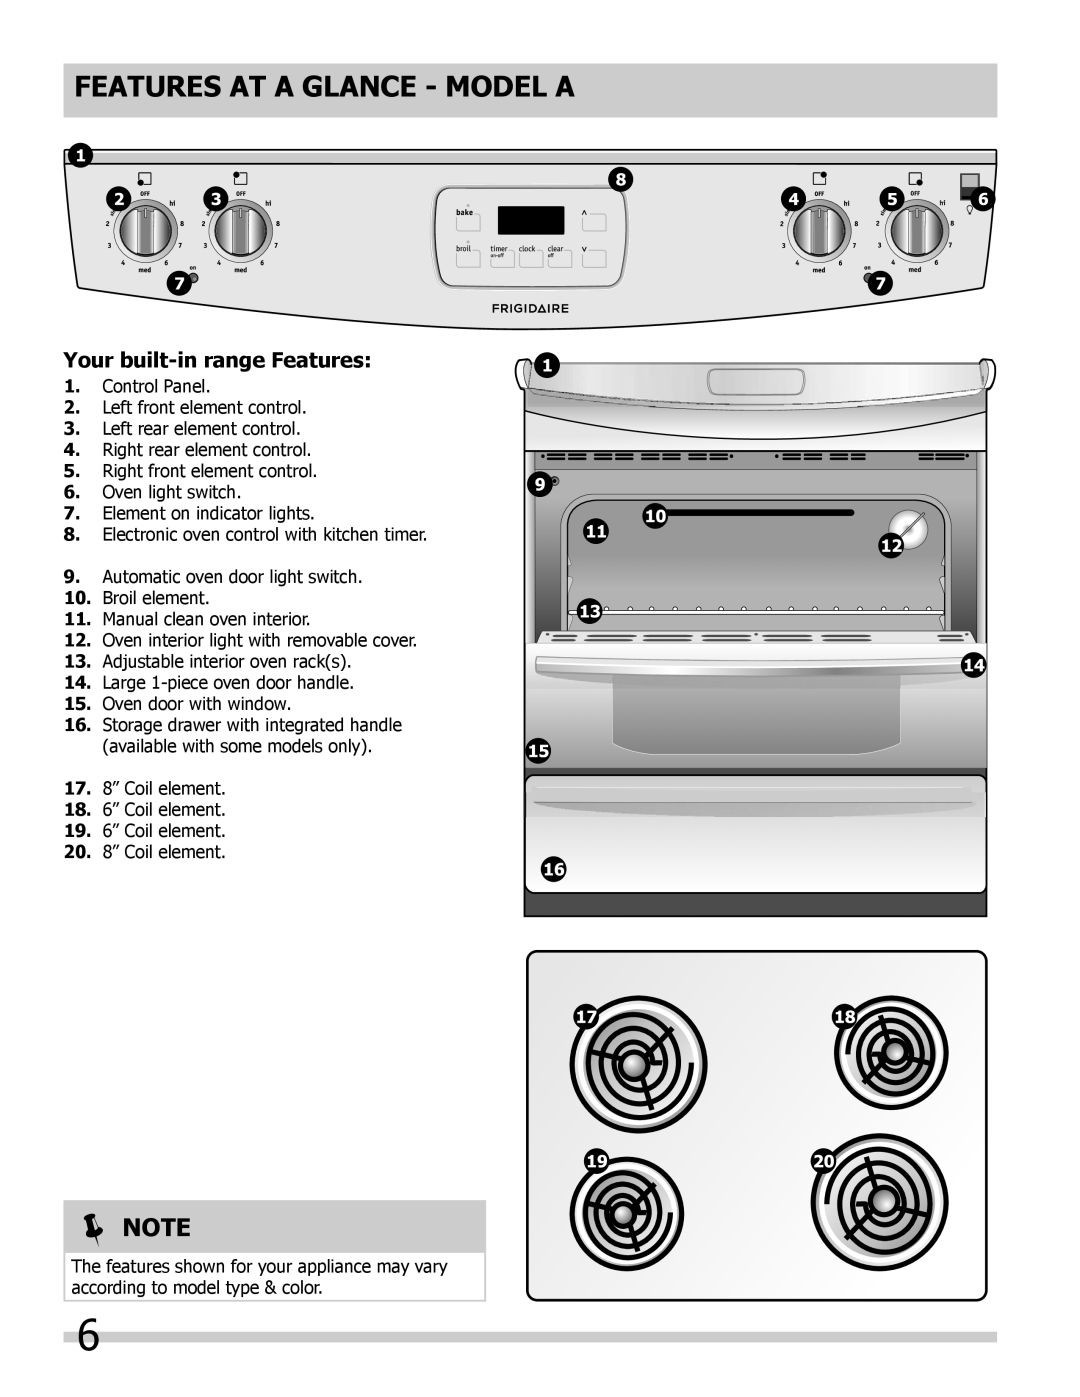 Frigidaire B manual FEATURES AT A GLANCE - mODEL A, Your built-inrange Features, Note 